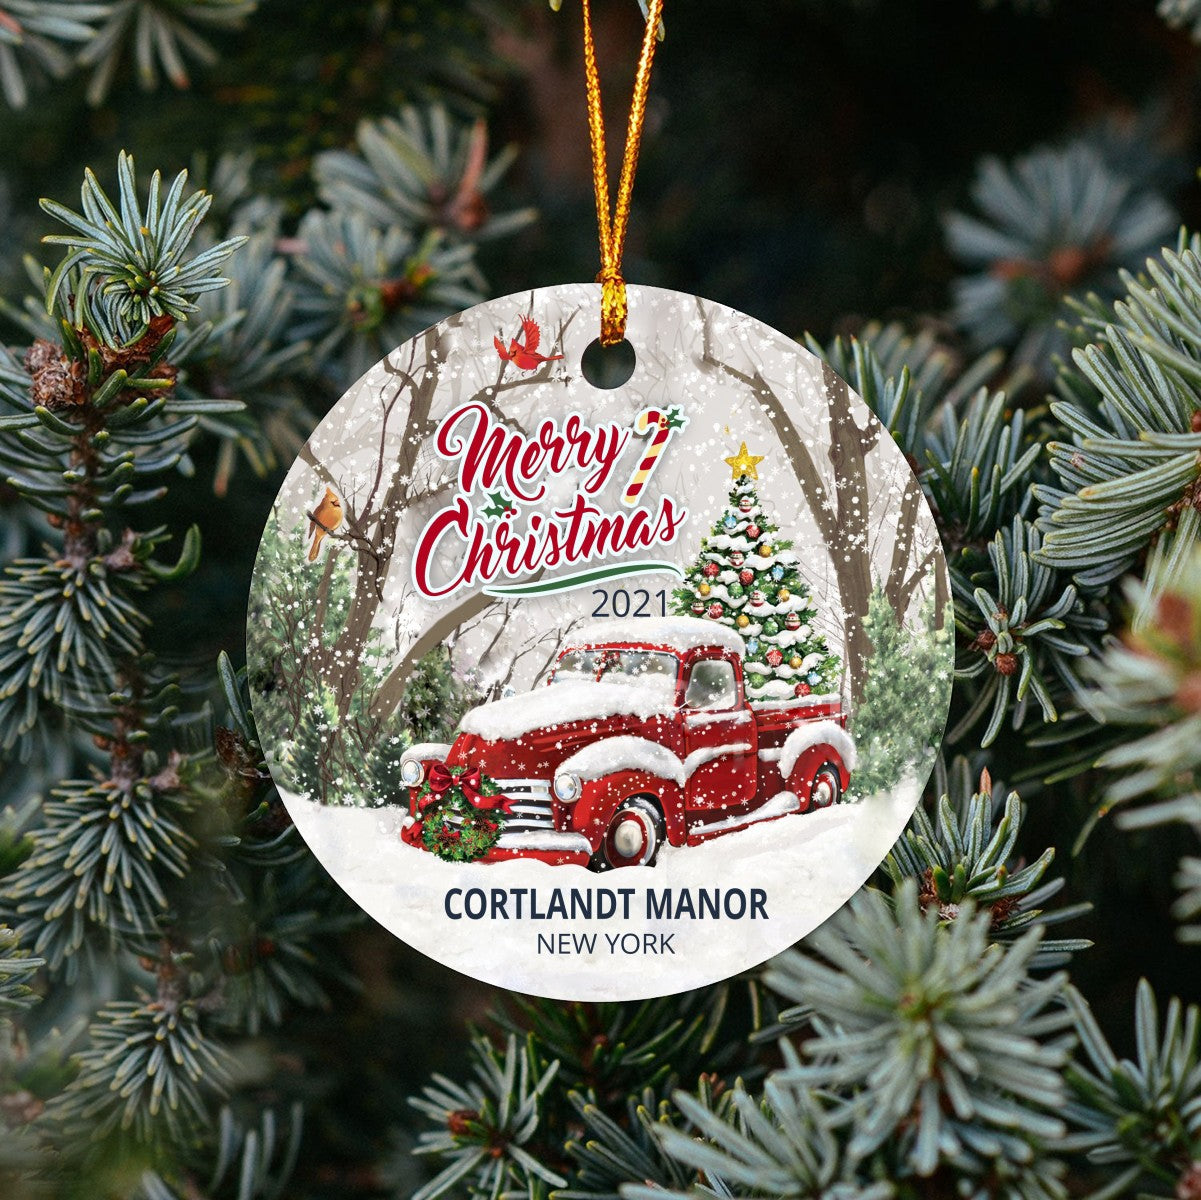 Christmas Tree Ornaments Cortlandt Manor - Ornament With Name City, State Cortlandt Manor New York NY Ornament - Red Truck Xmas Ornaments 3'' Plastic Gift For Family, Friend And Housewarming